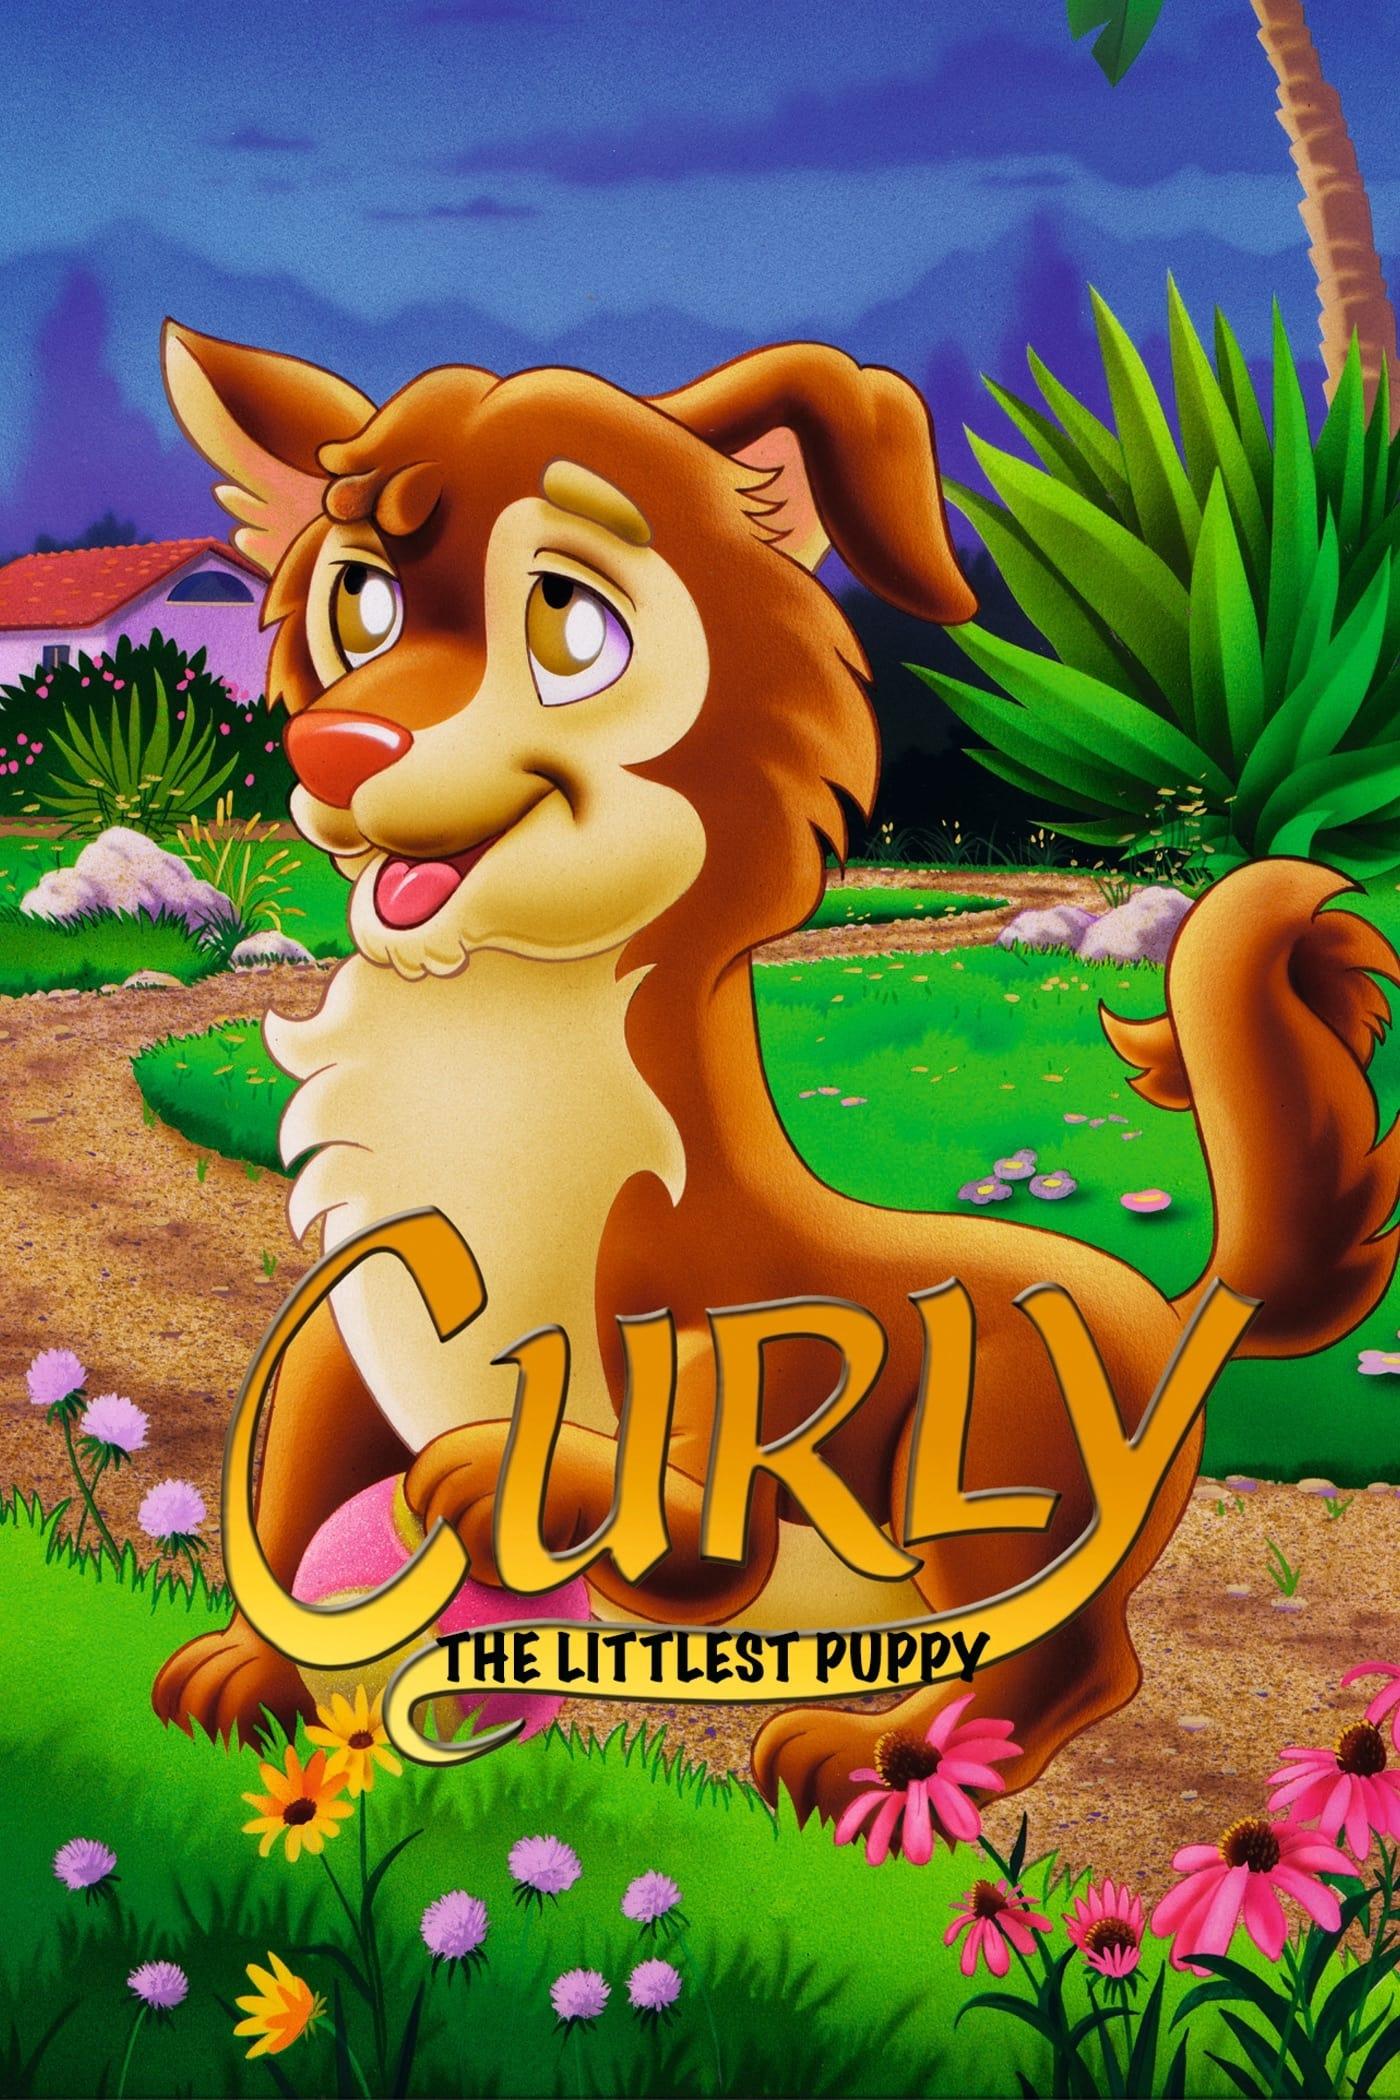 Curly - The Littlest Puppy poster